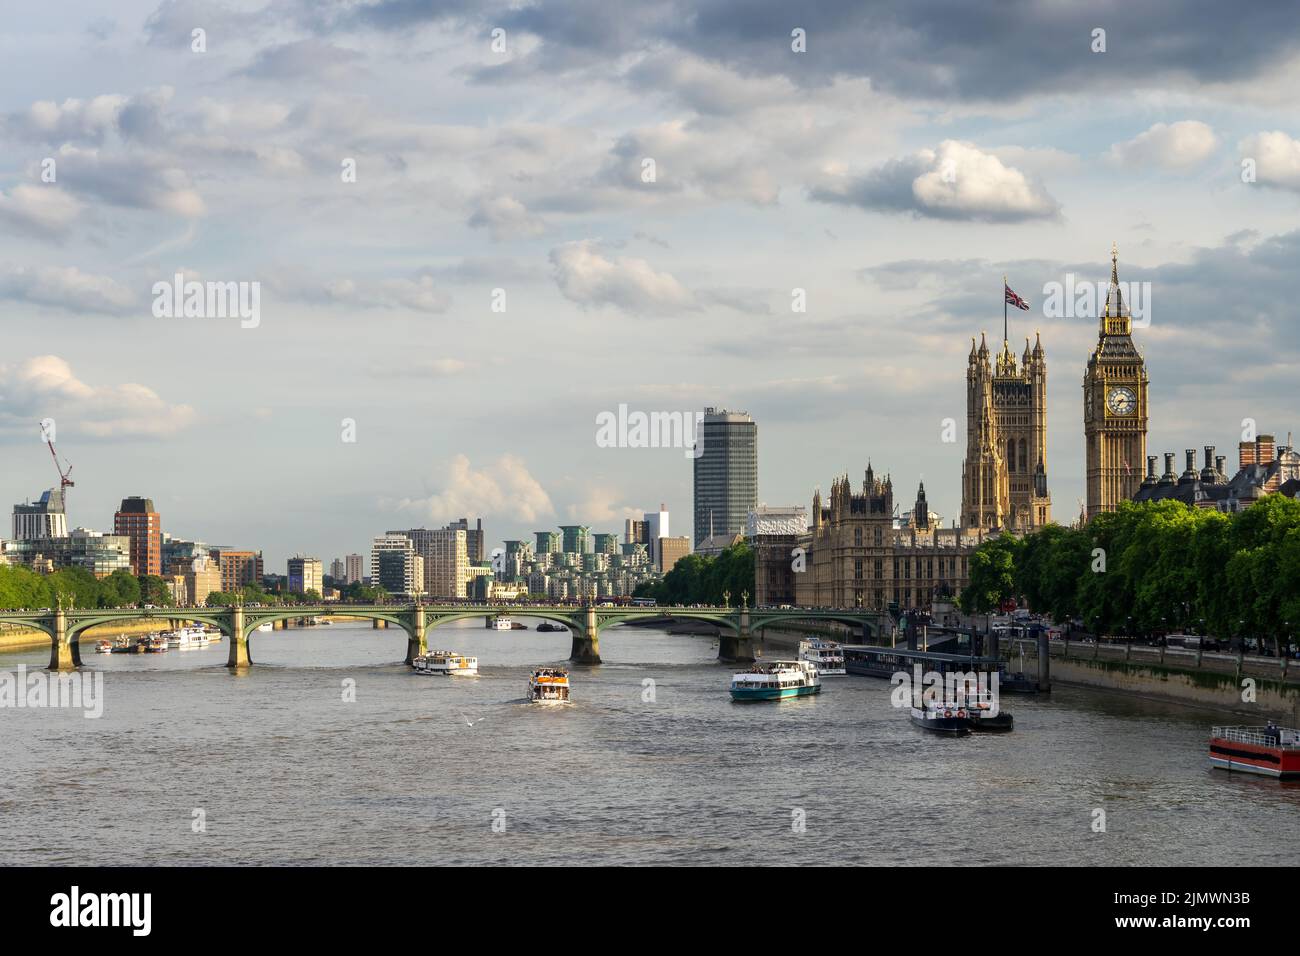 View up the River Thames towards Big Ben and the Houses of Parliament Stock Photo